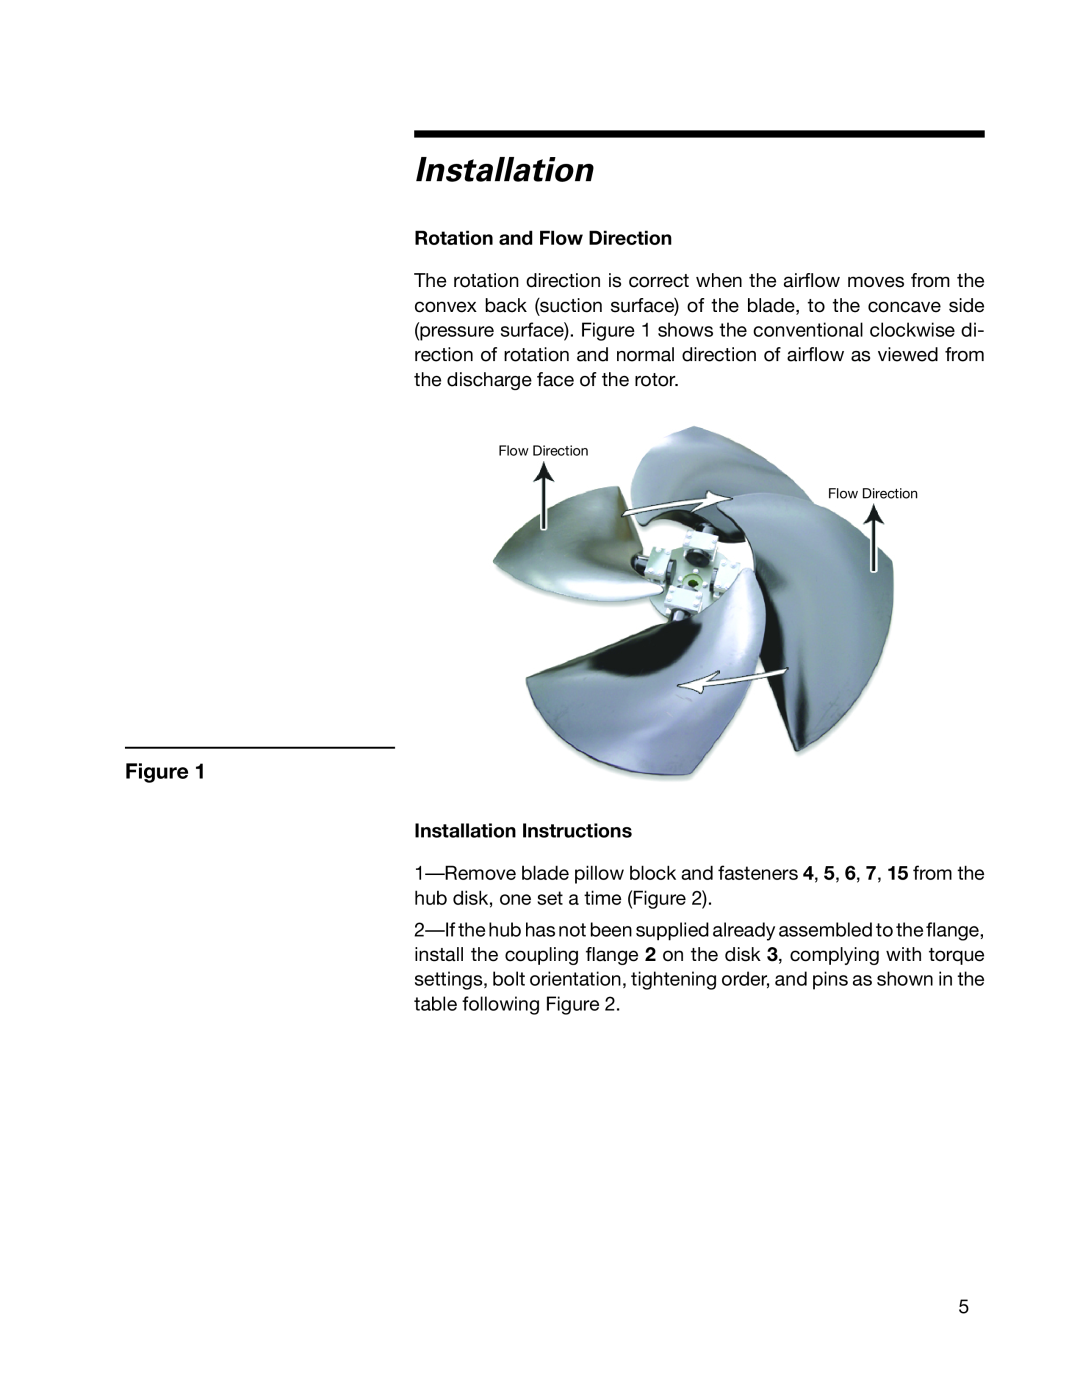 SPX Cooling Technologies 07-1126 user manual Rotation and Flow Direction, Installation Instructions 